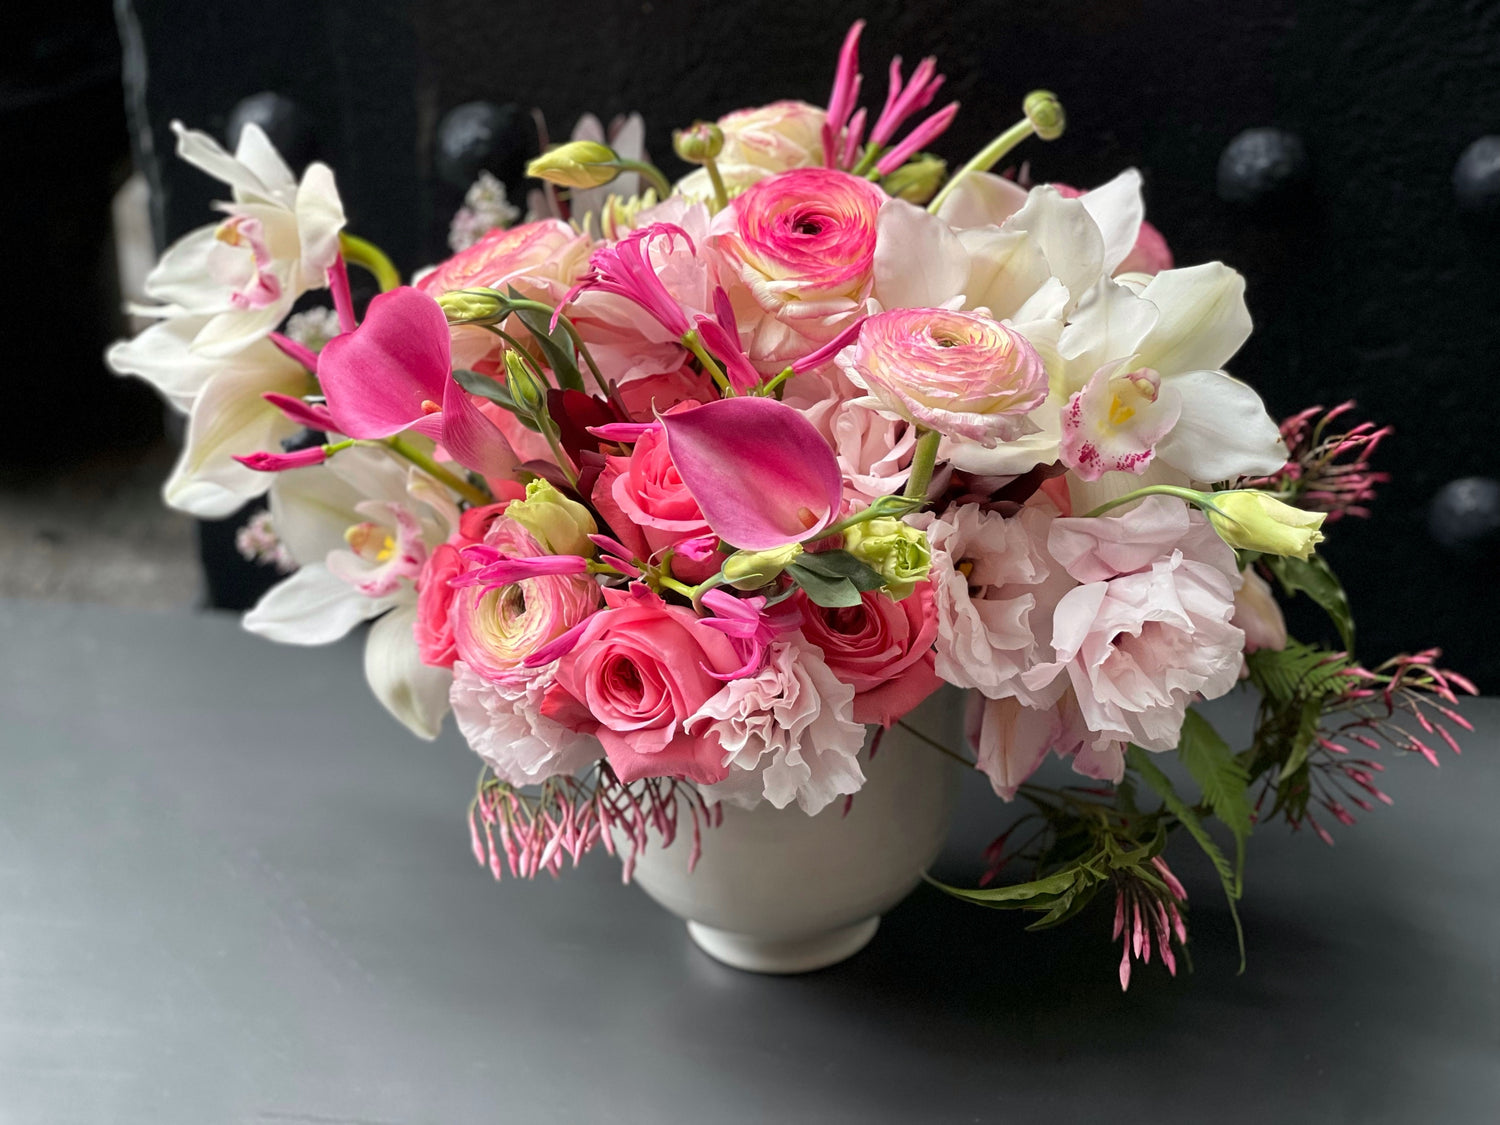 these flowers, so white and pink, are like stars that in the Earth’s firmament do shine. the whiteness of ranunculus and calla lilies make the arrangement pop out. The violet of the orchids works as an accent color giving a sense of harmony and beauty. 